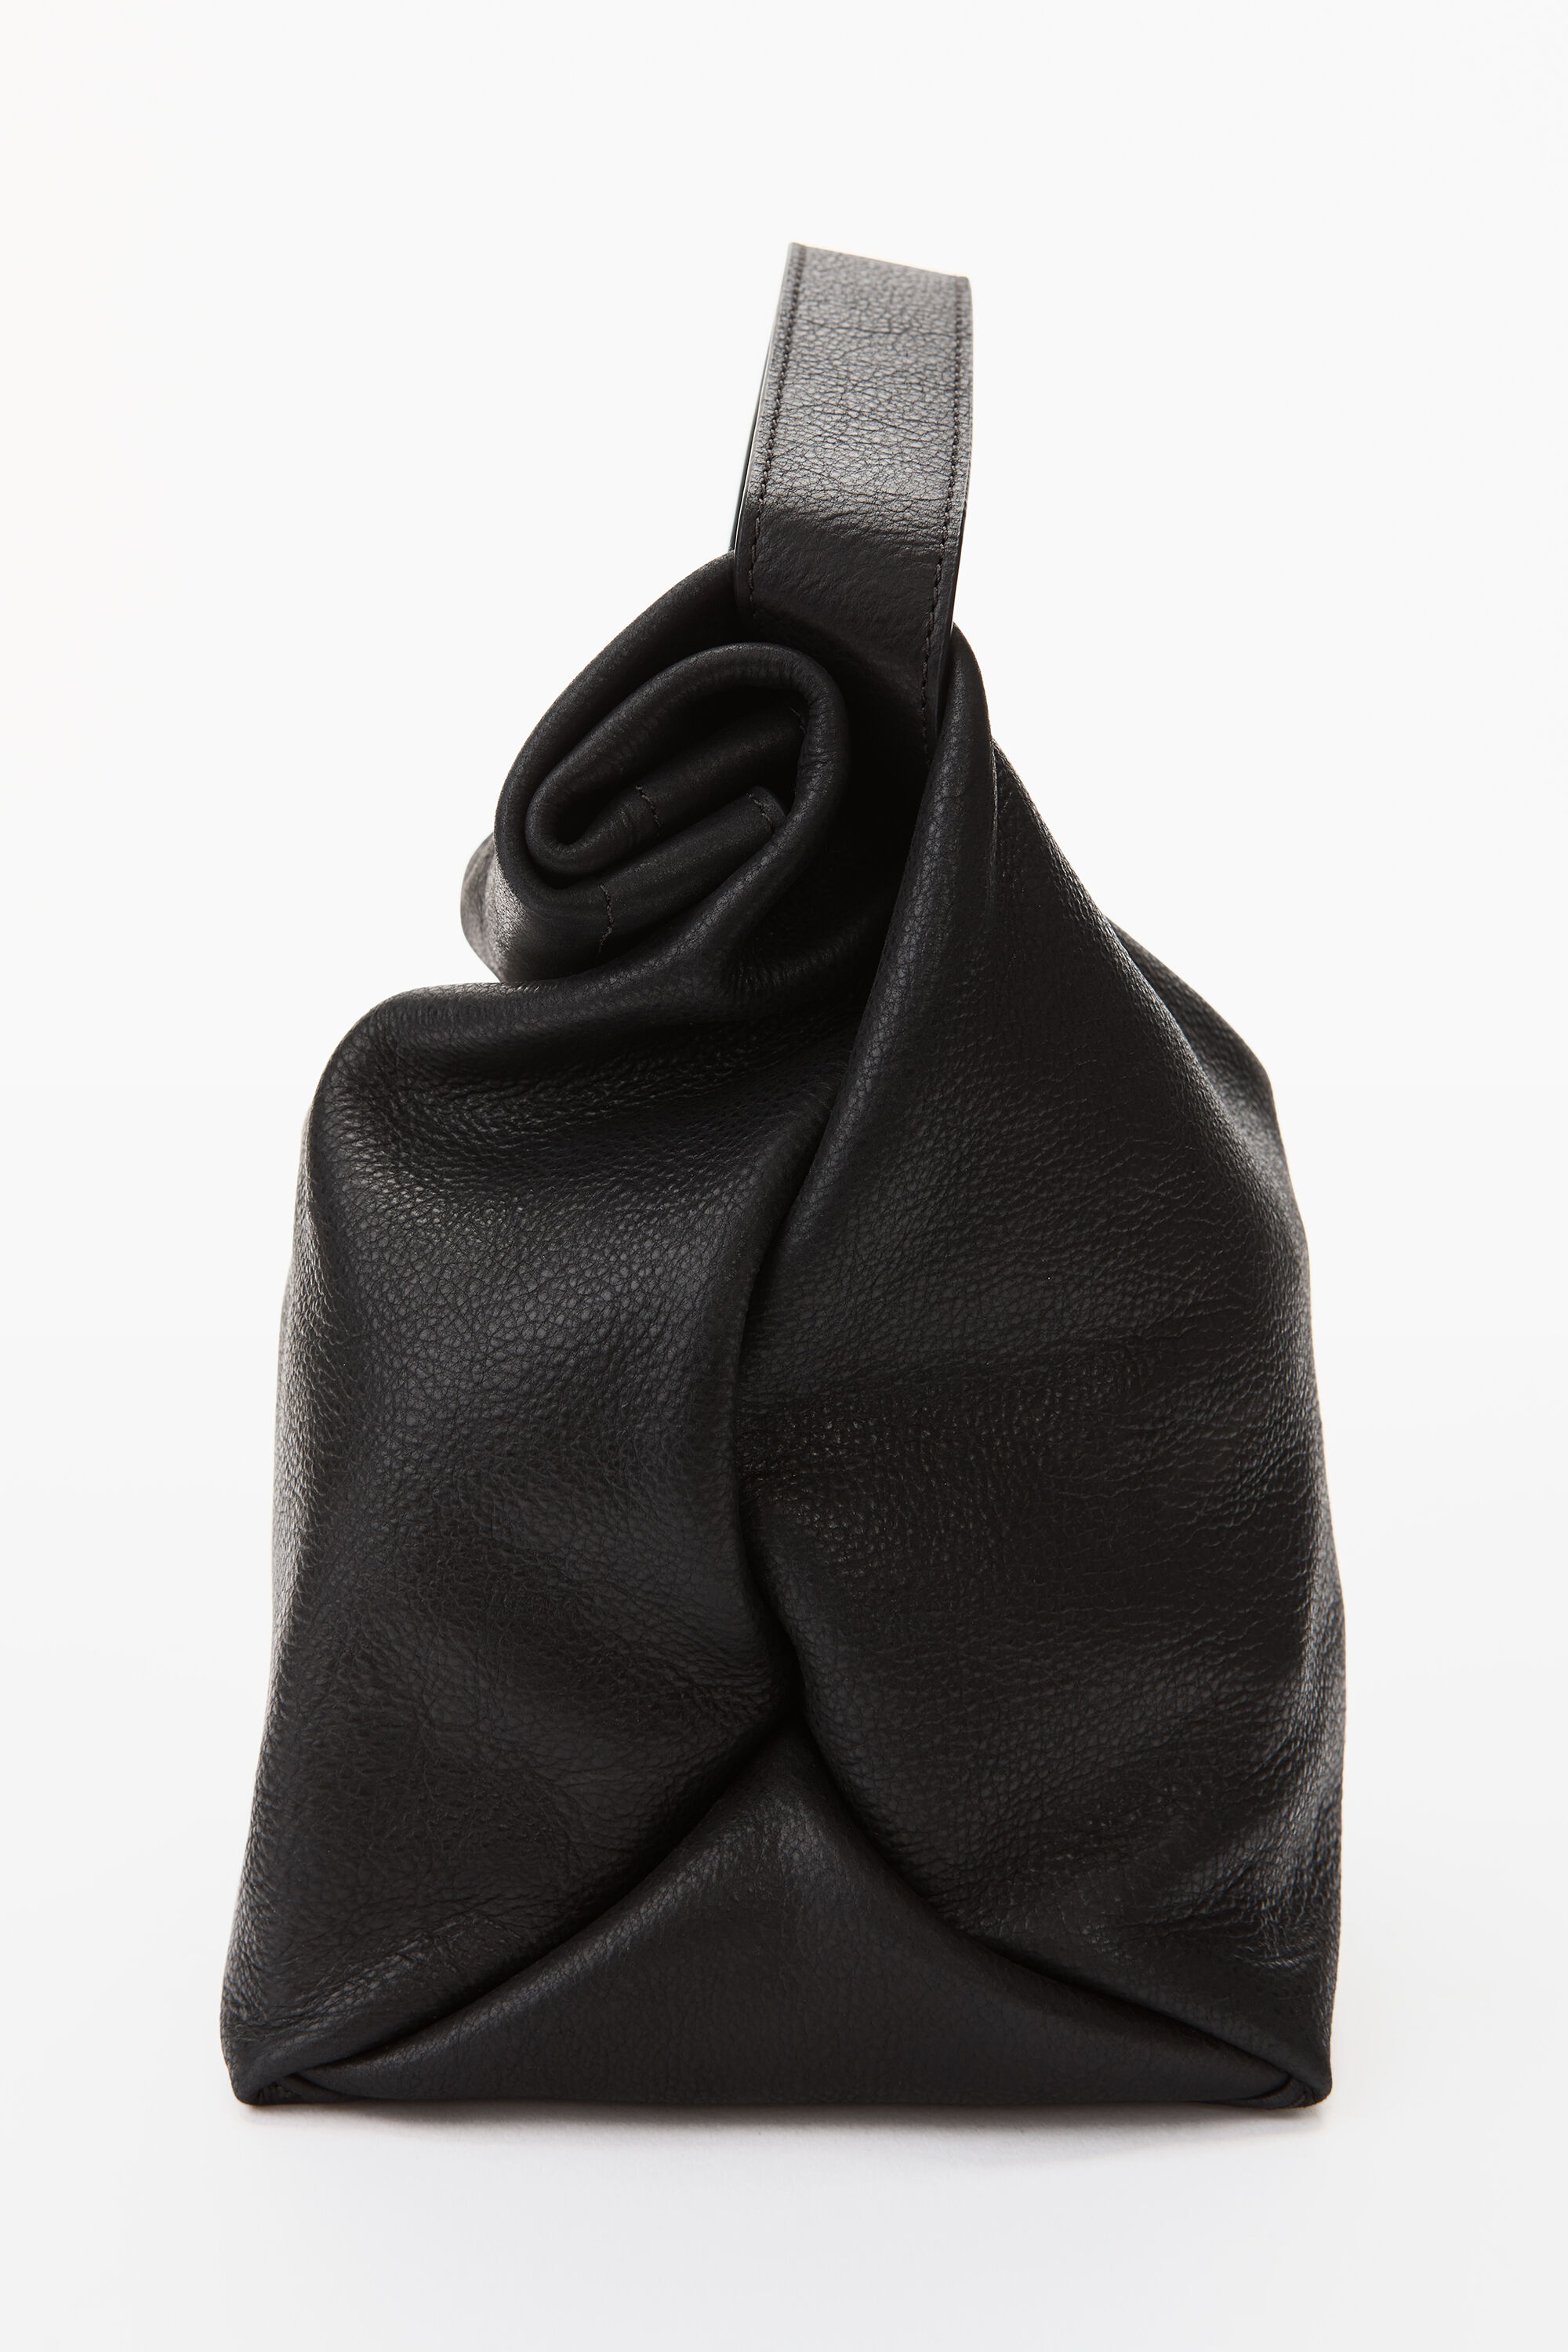 alexanderwang SMALL LUNCH BAG IN WAXED LEATHER BLACK 